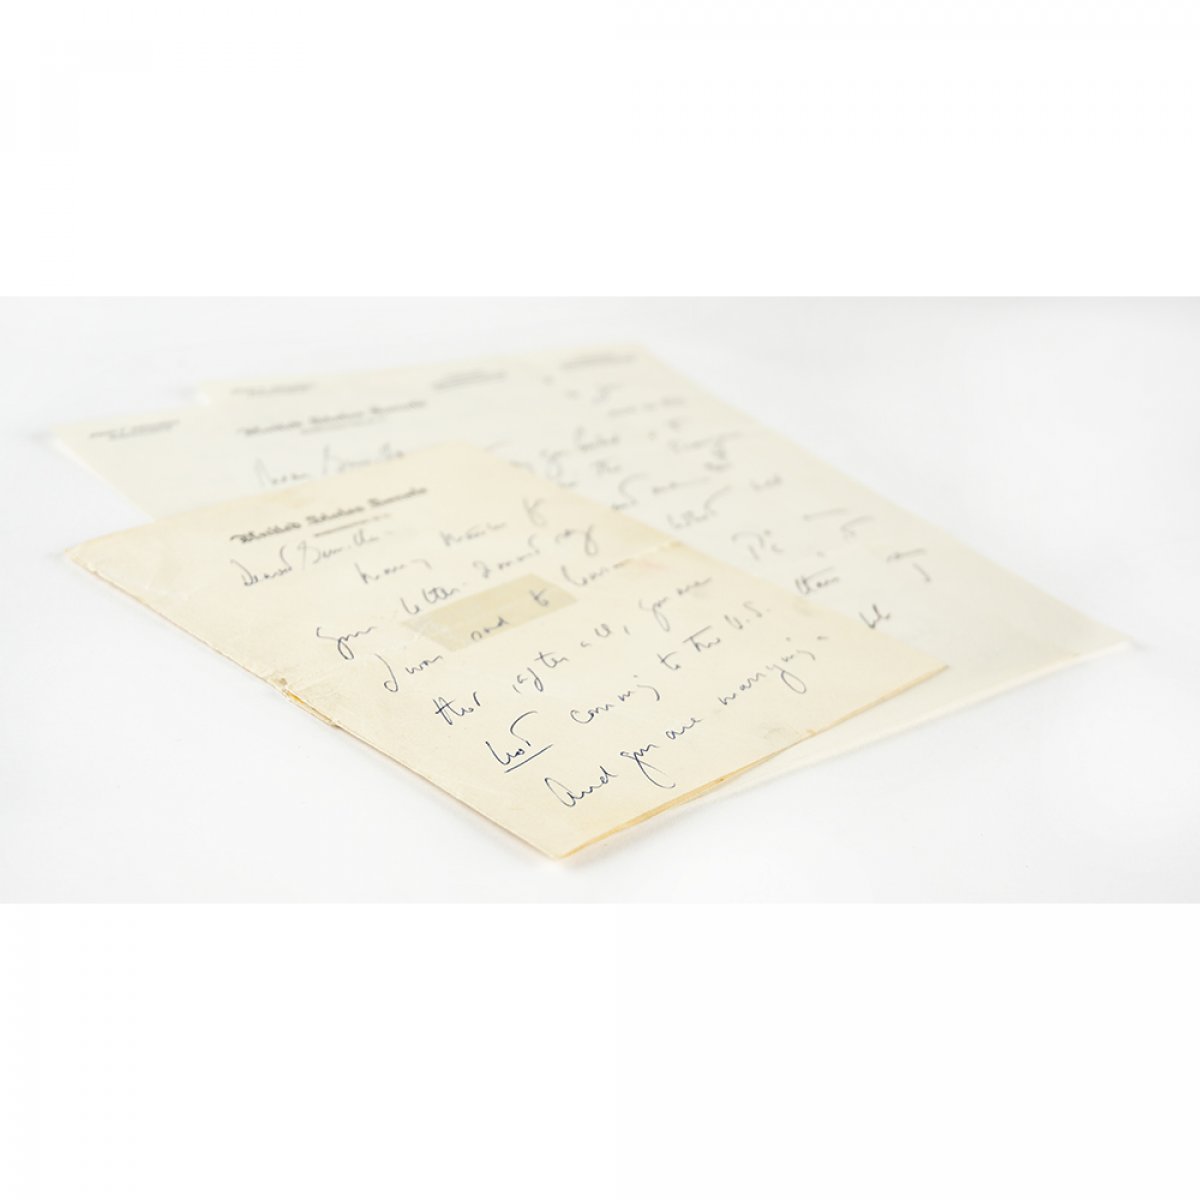 Letters written by John F. Kennedy to his girlfriend sold for $88,000 #3